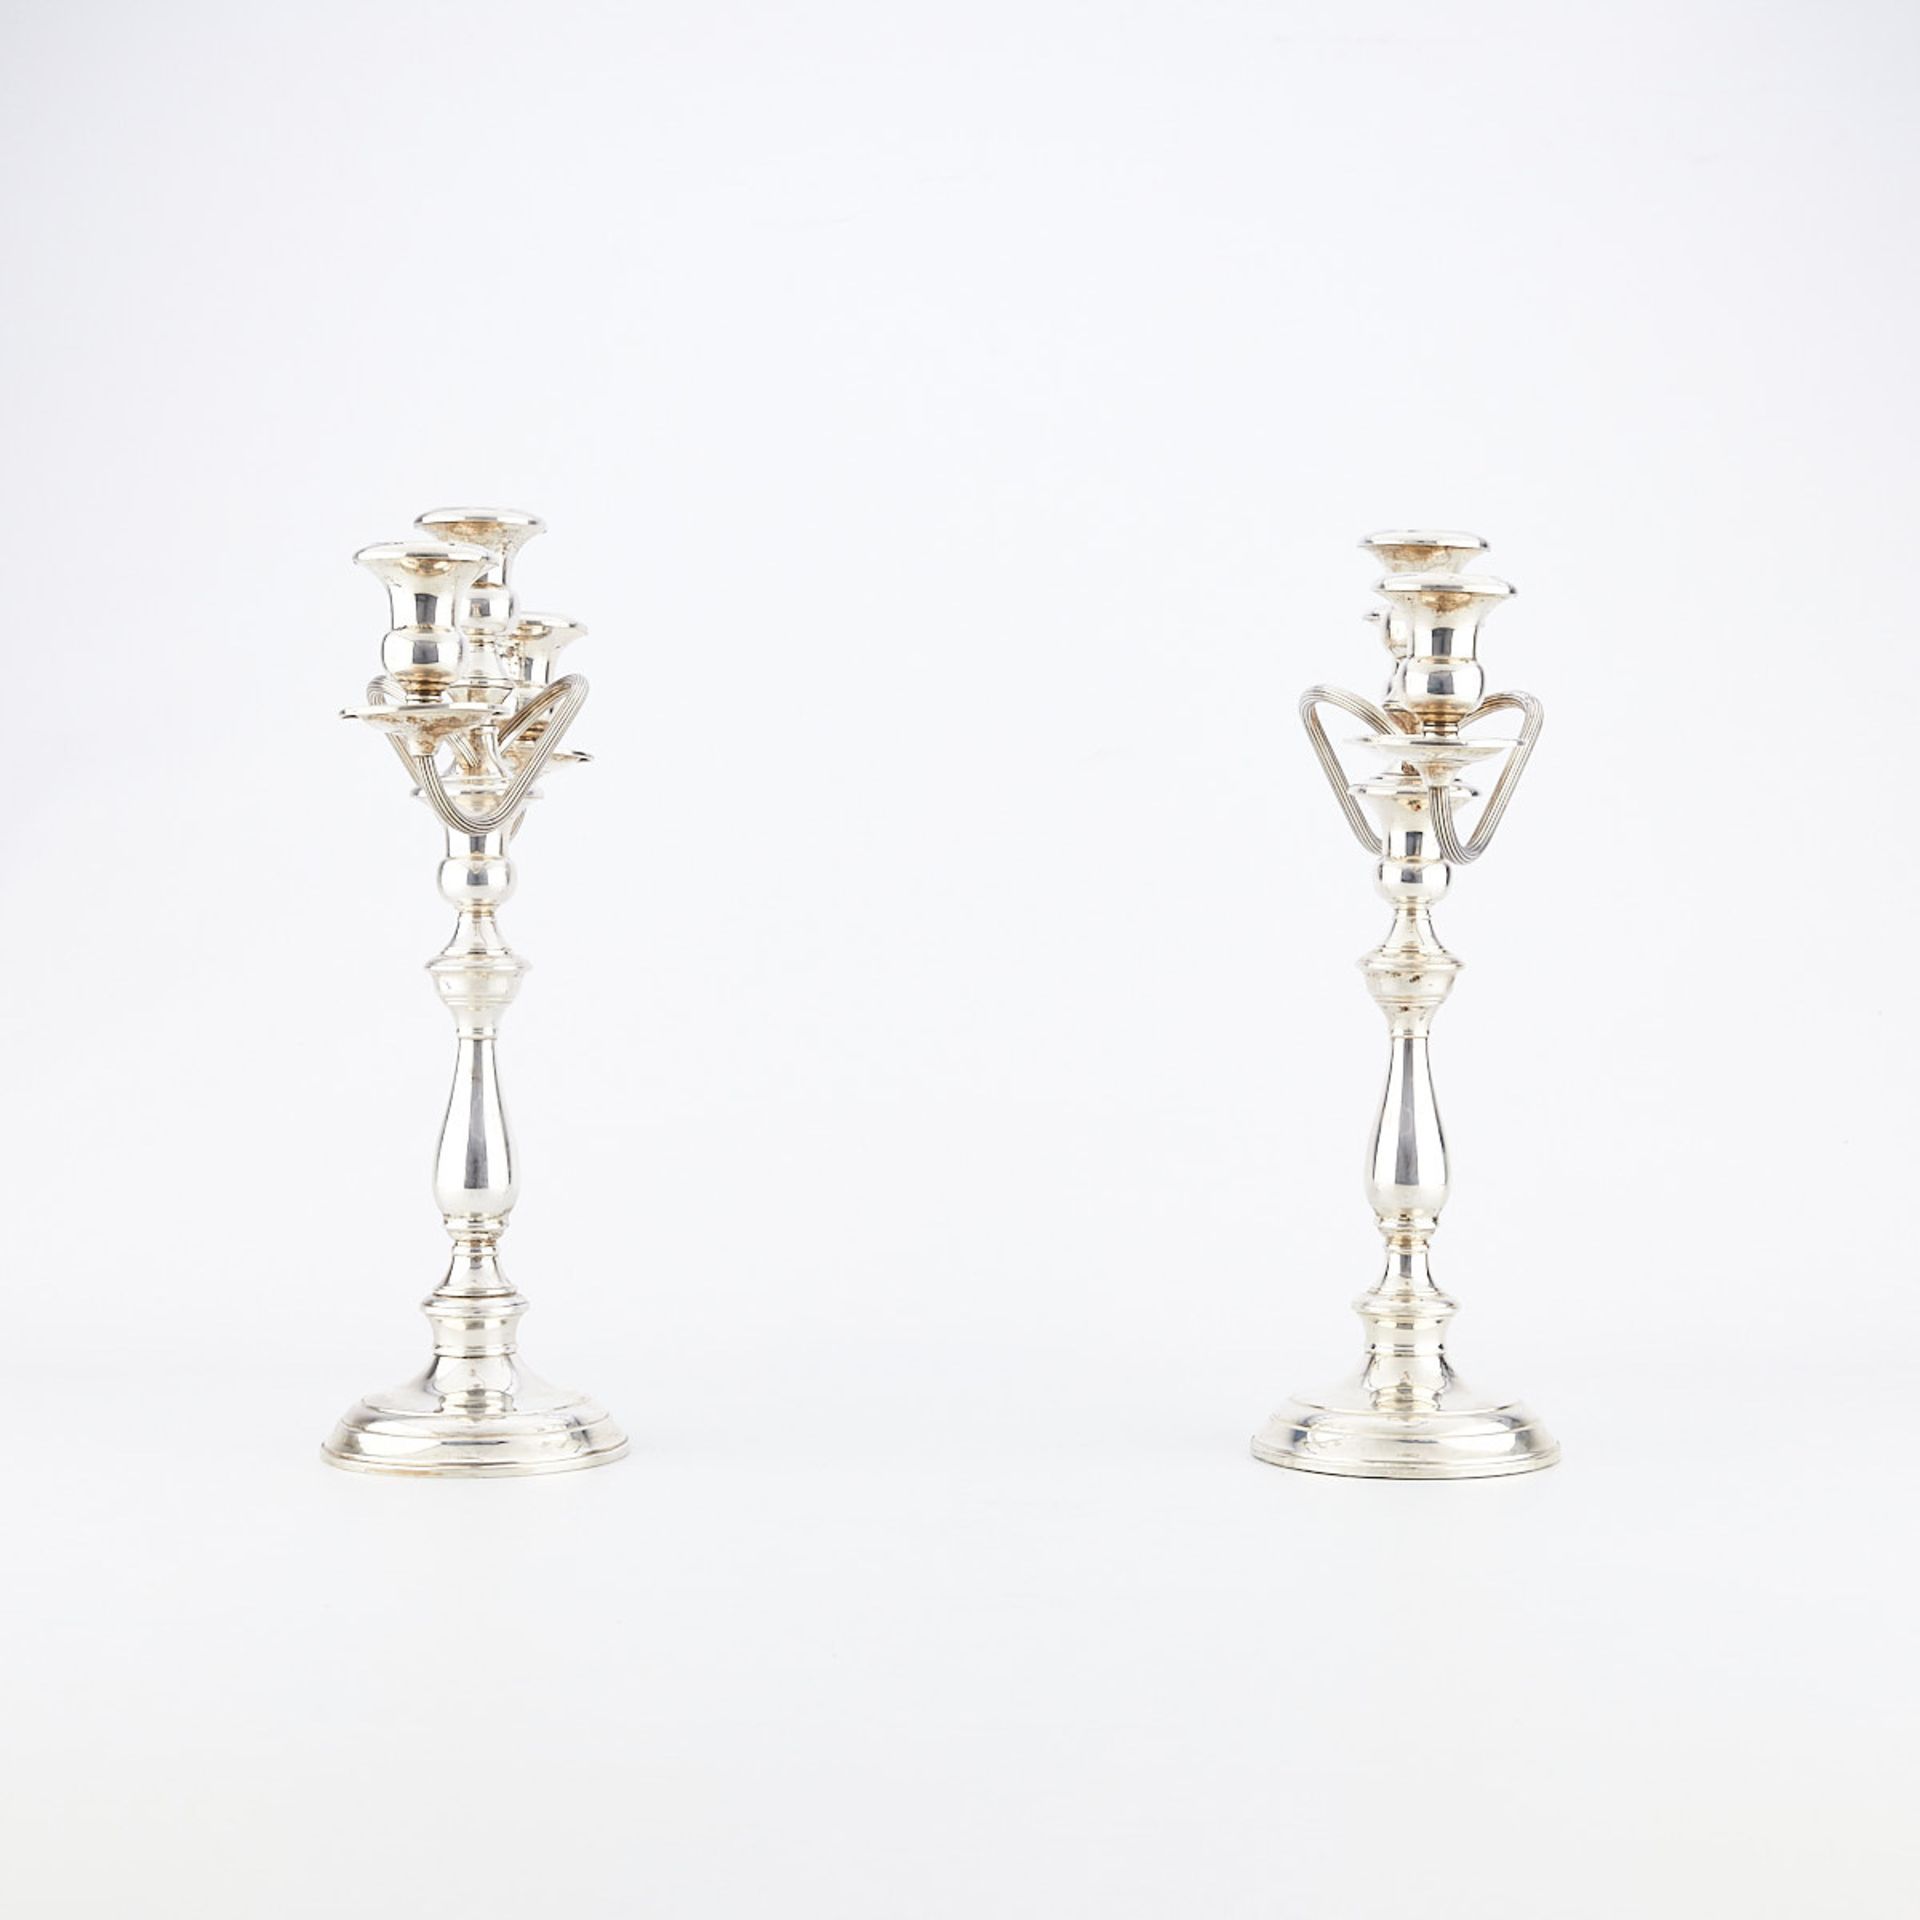 Pair of Whiting Sterling Silver Candelabra - Image 5 of 11